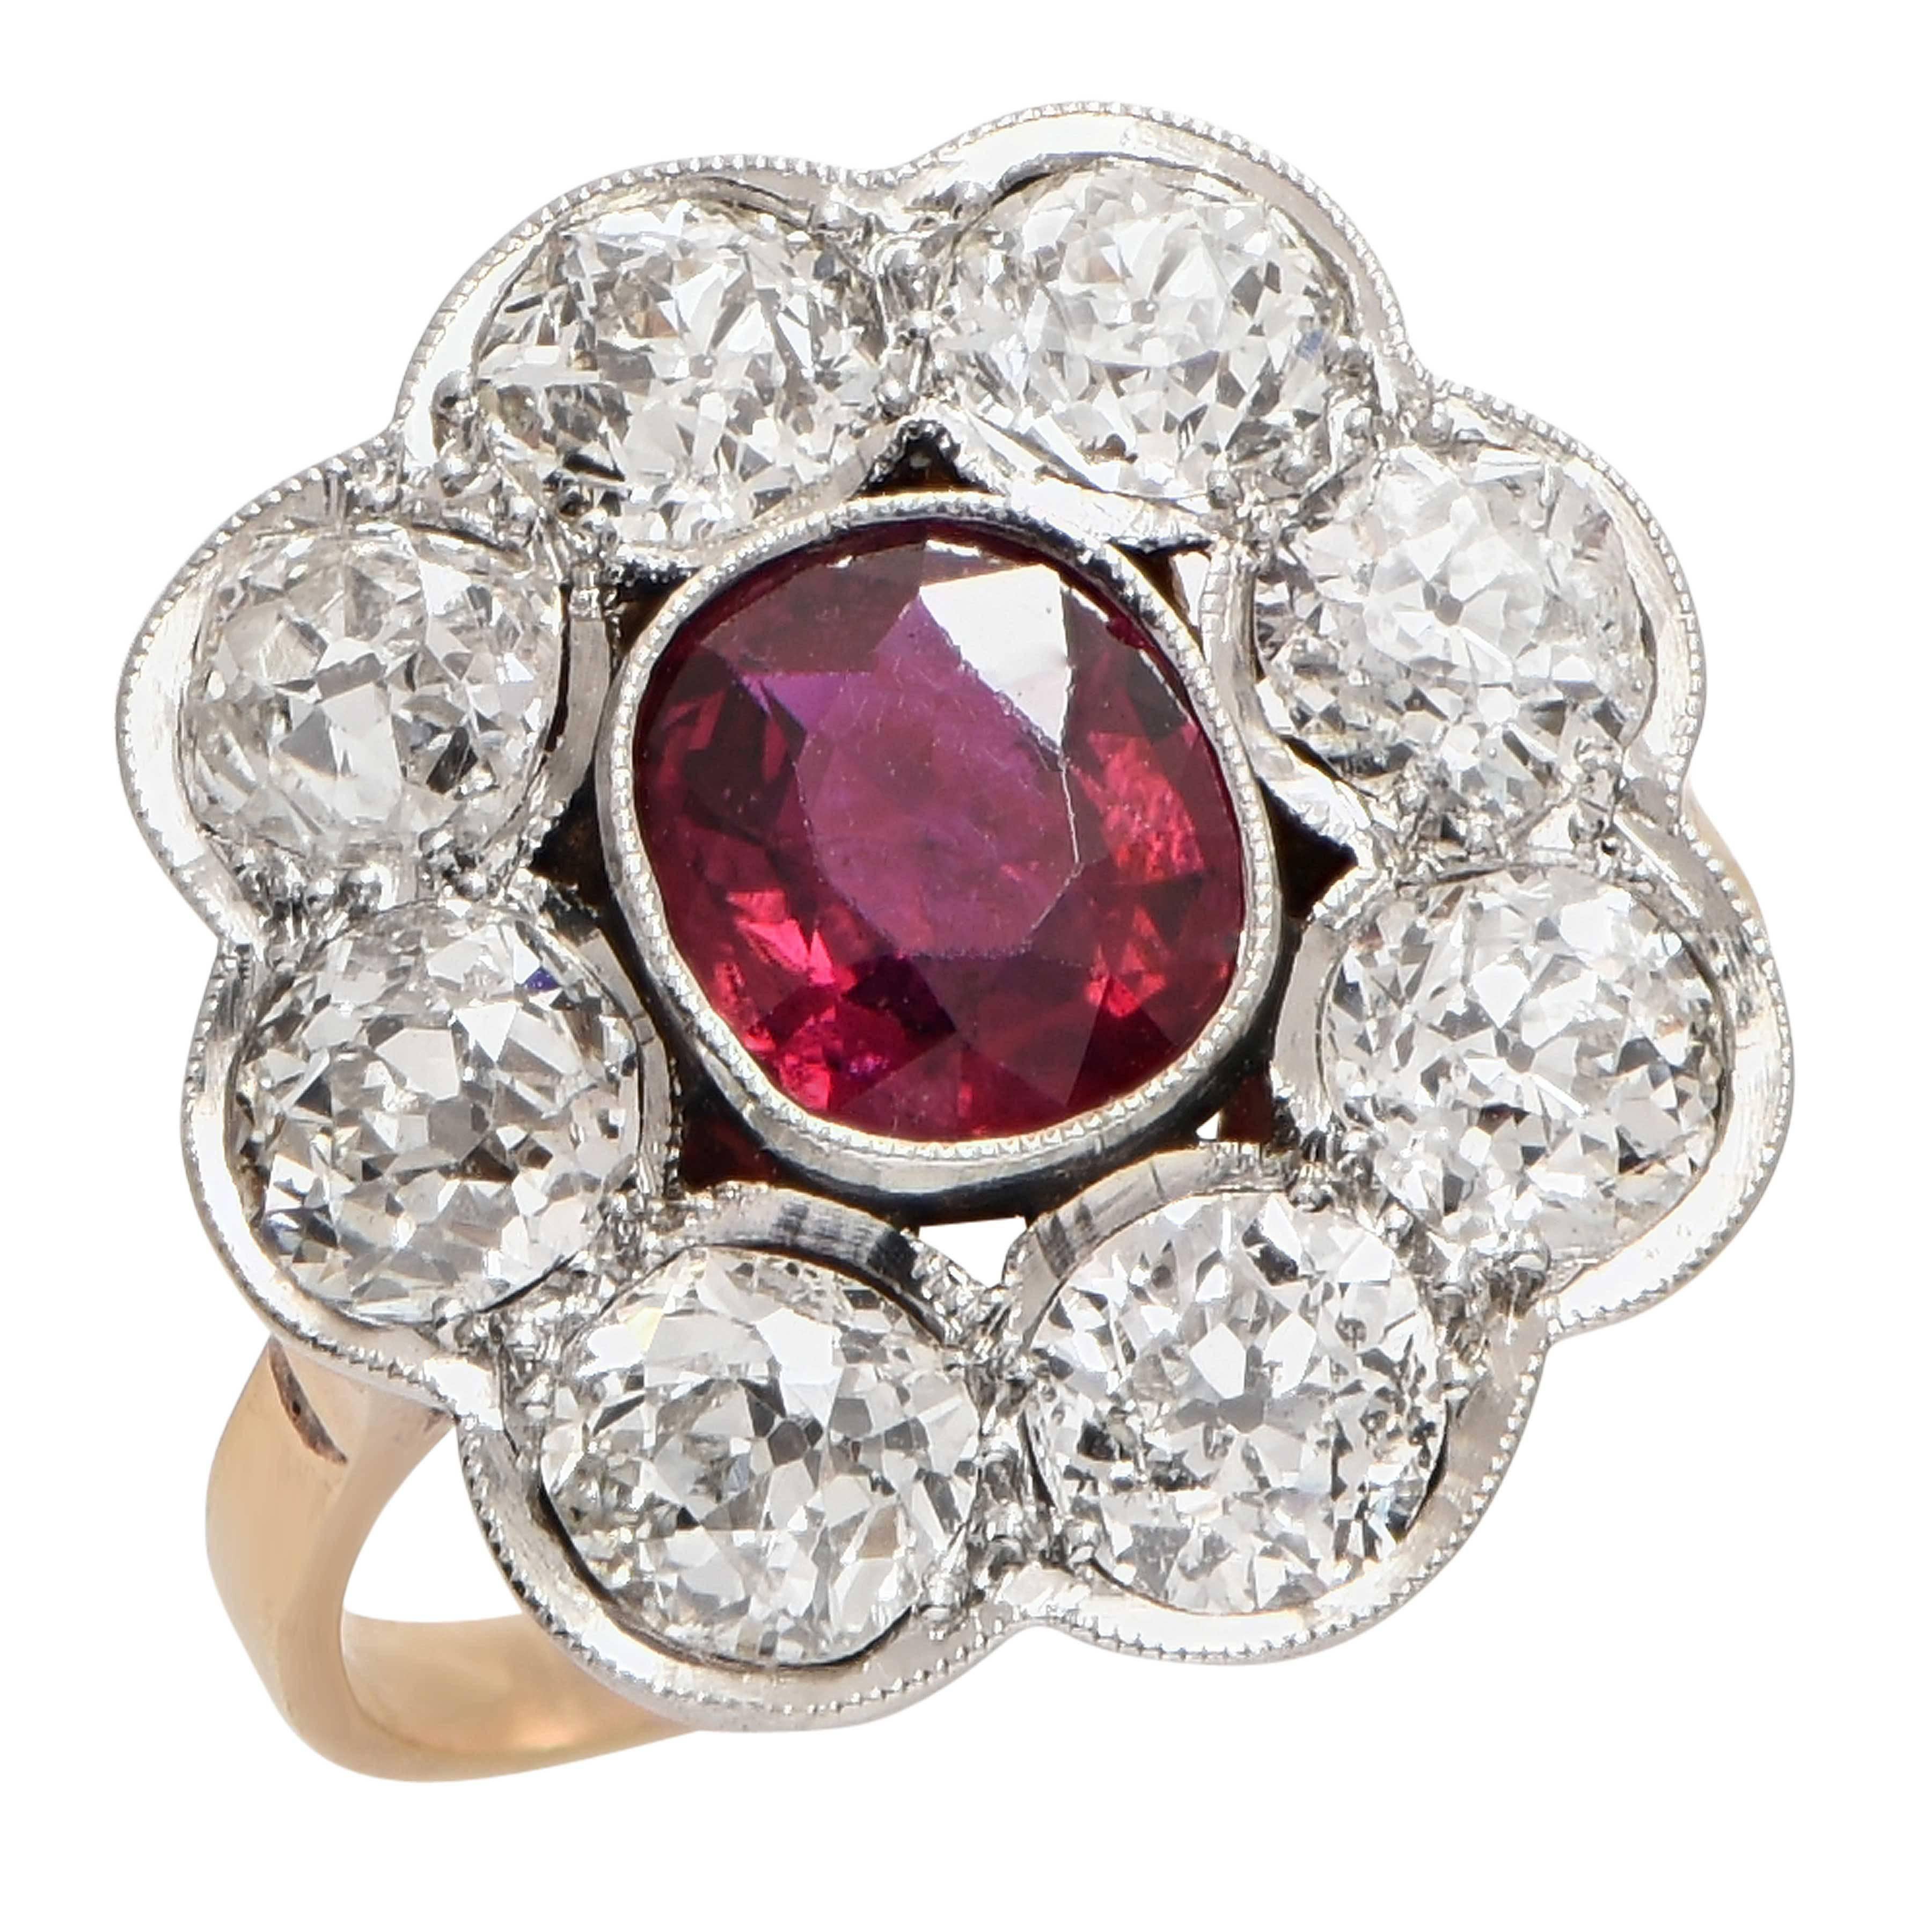 Rubellite Old Mine Cut Diamond Ring In Excellent Condition For Sale In Bay Harbor Islands, FL